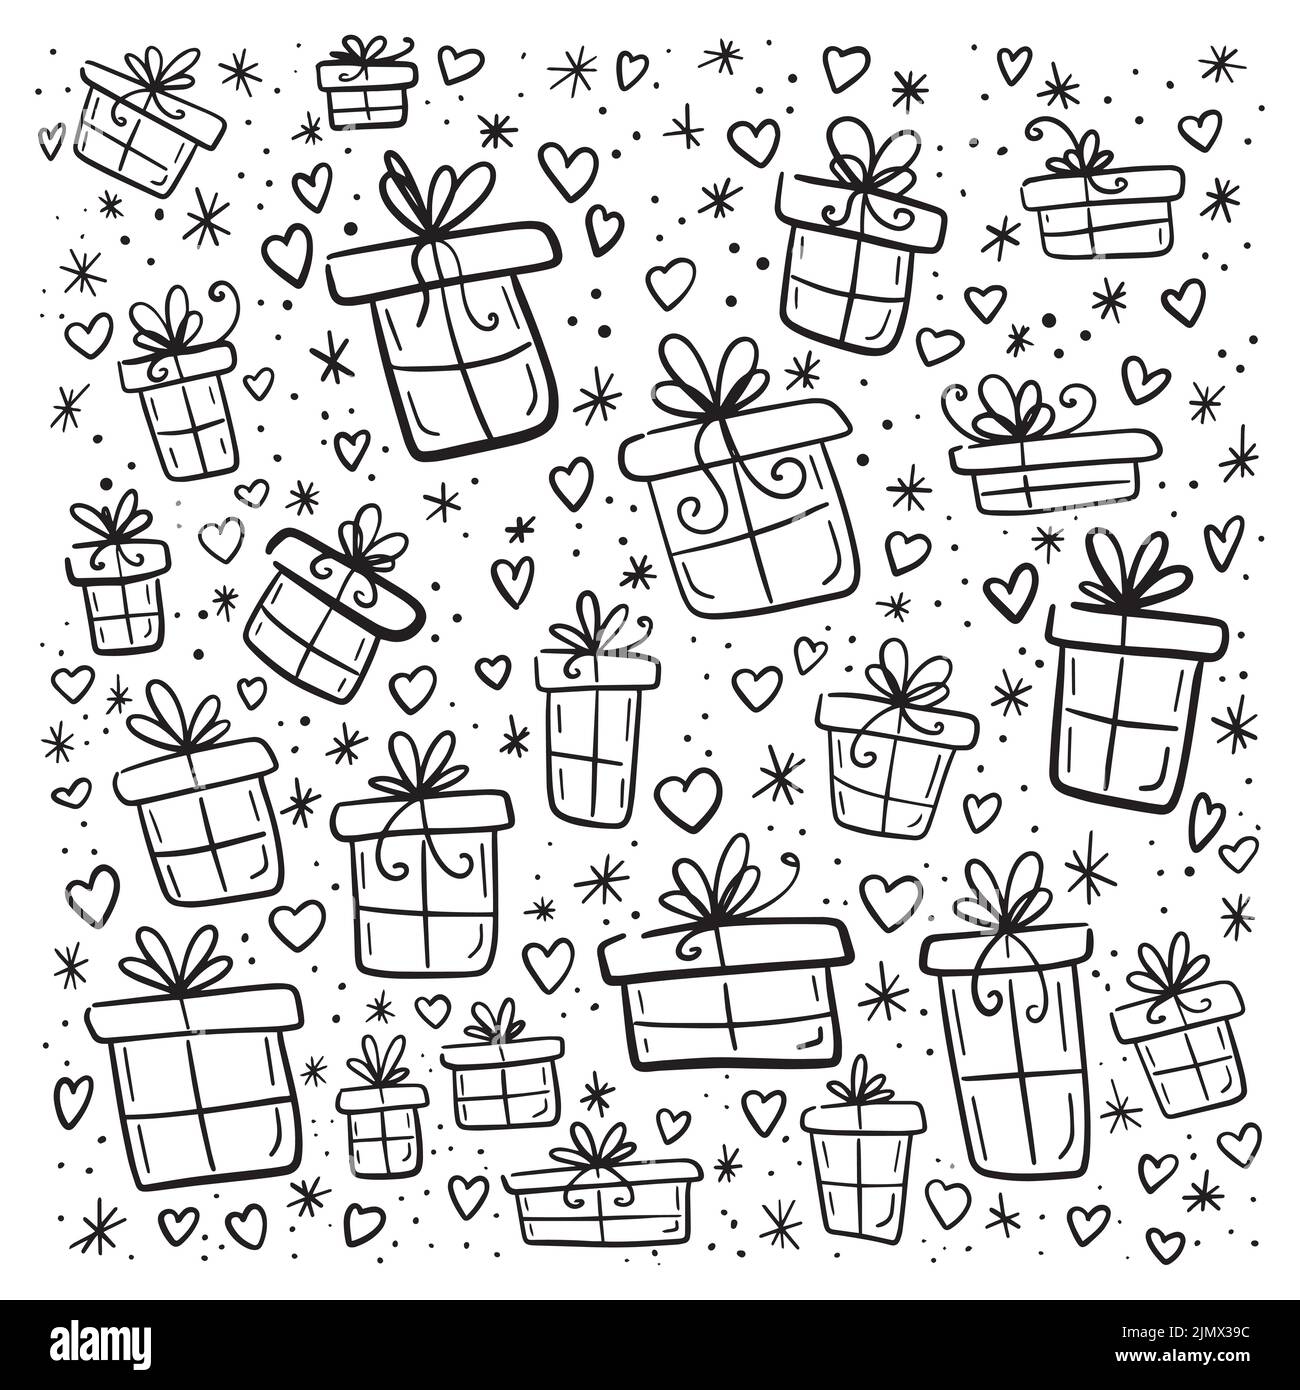 Simple Seamless Vector Hand Draw Sketch Black and White Doodle